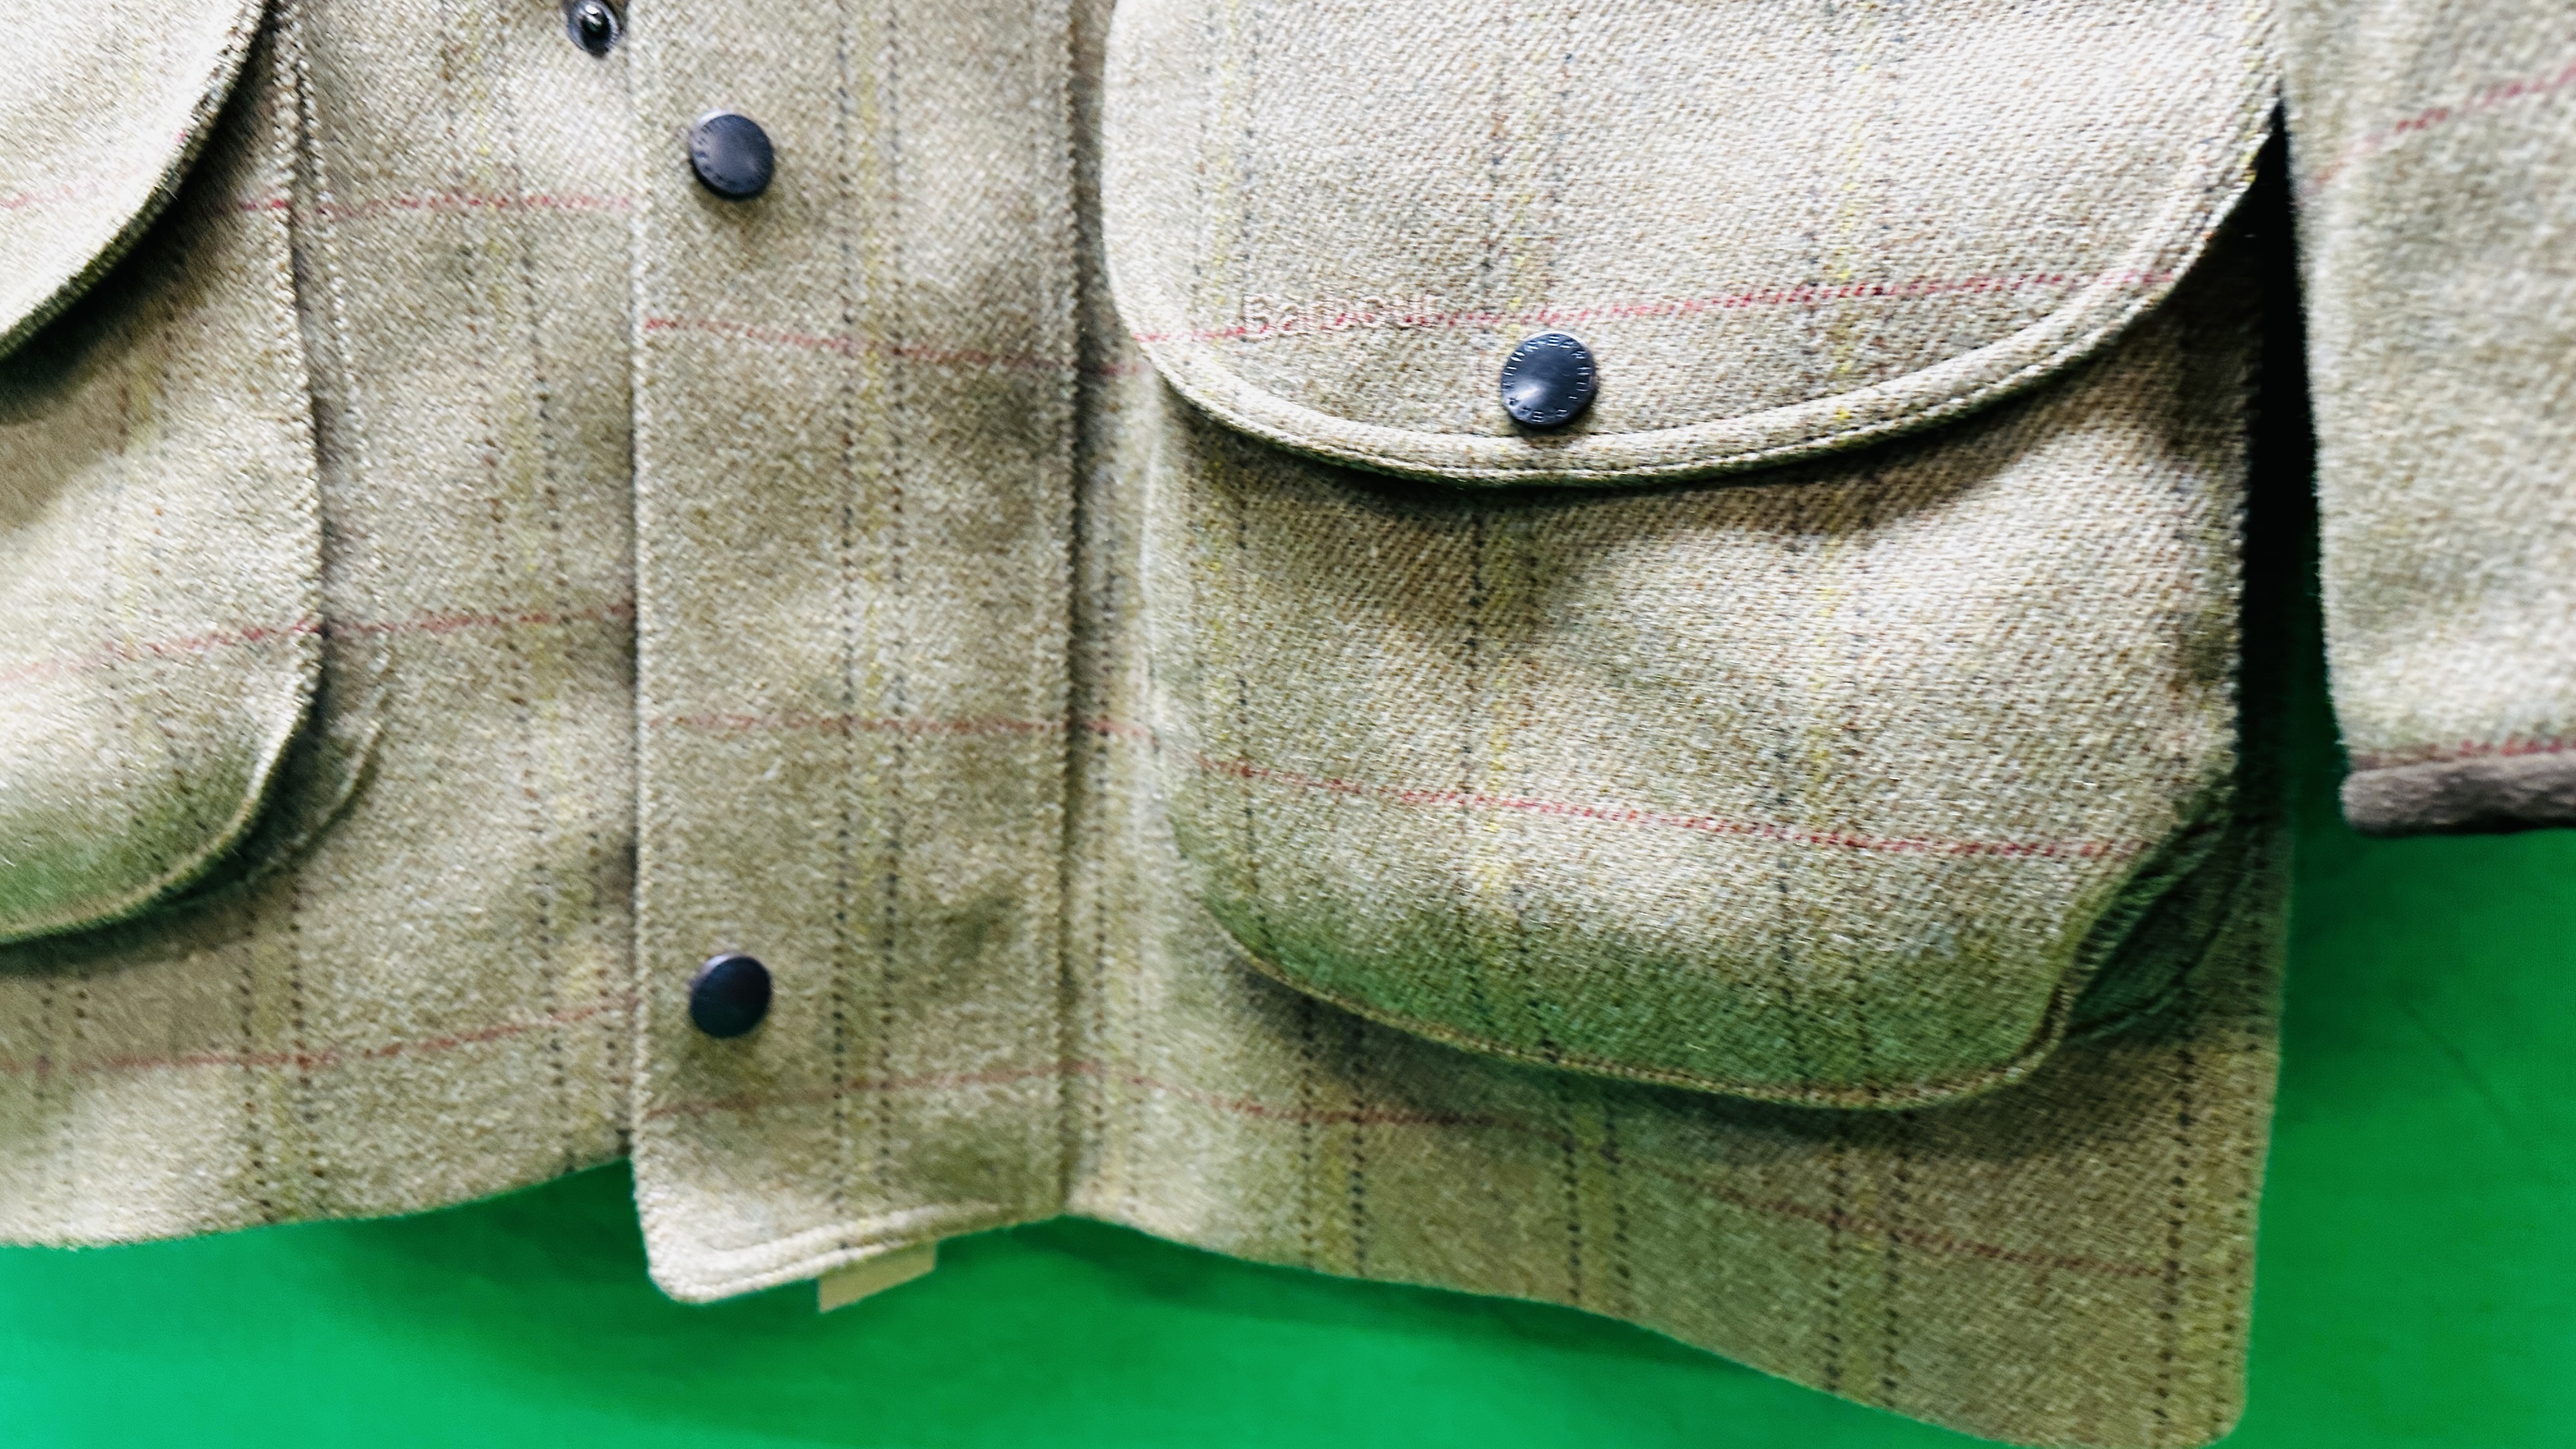 BARBOUR DOUBLE TWIST 100% MERINO 2 PLY TWEED COUNTRY COAT, STYLE T19, - Image 7 of 11